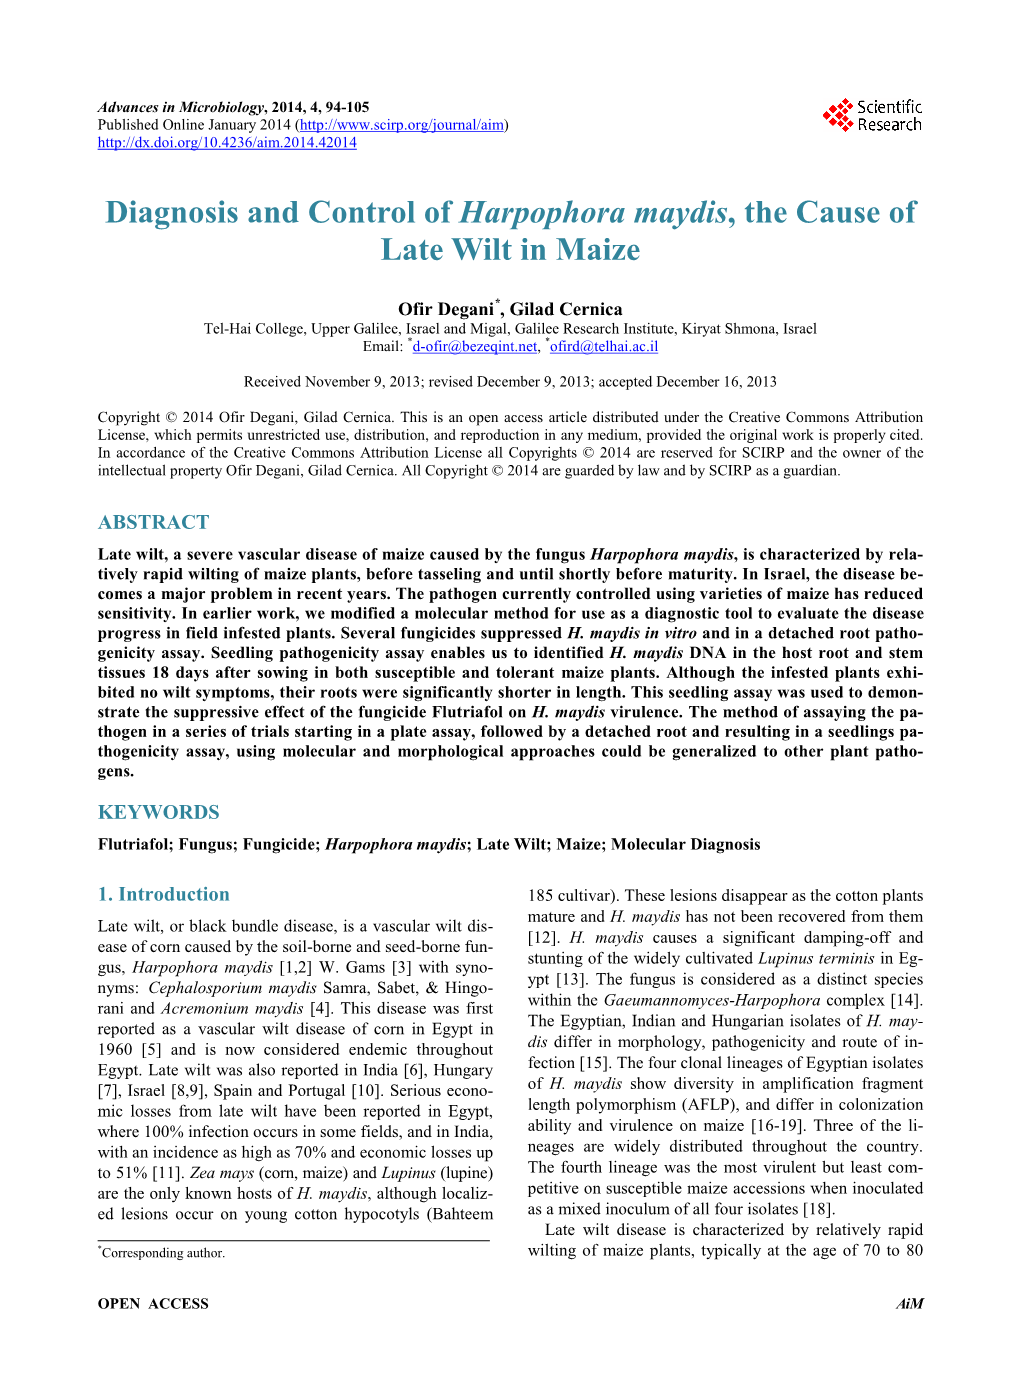 Diagnosis and Control of Harpophora Maydis, the Cause of Late Wilt in Maize